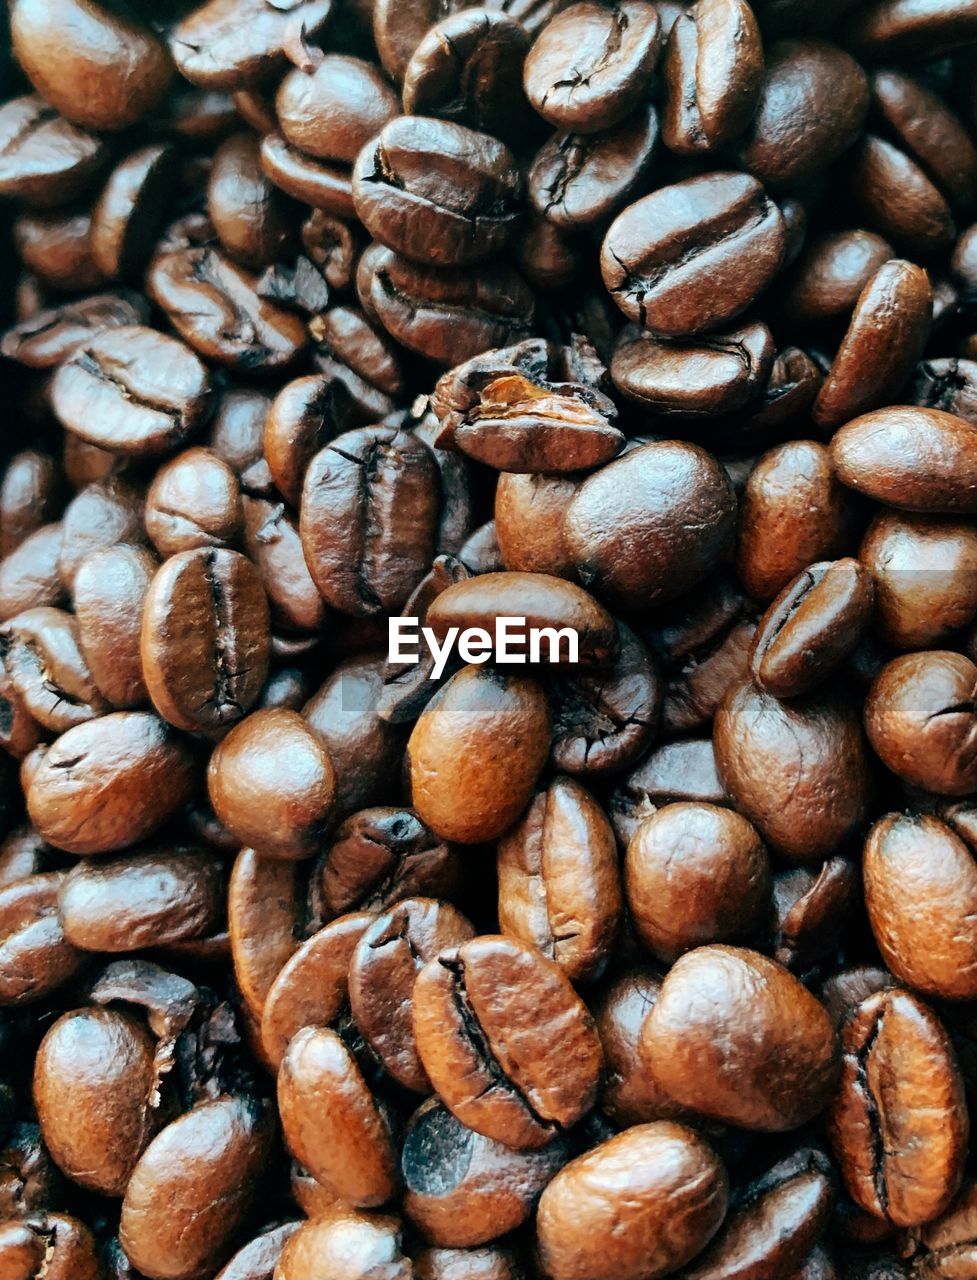 FULL FRAME SHOT OF COFFEE BEANS IN BACKGROUND